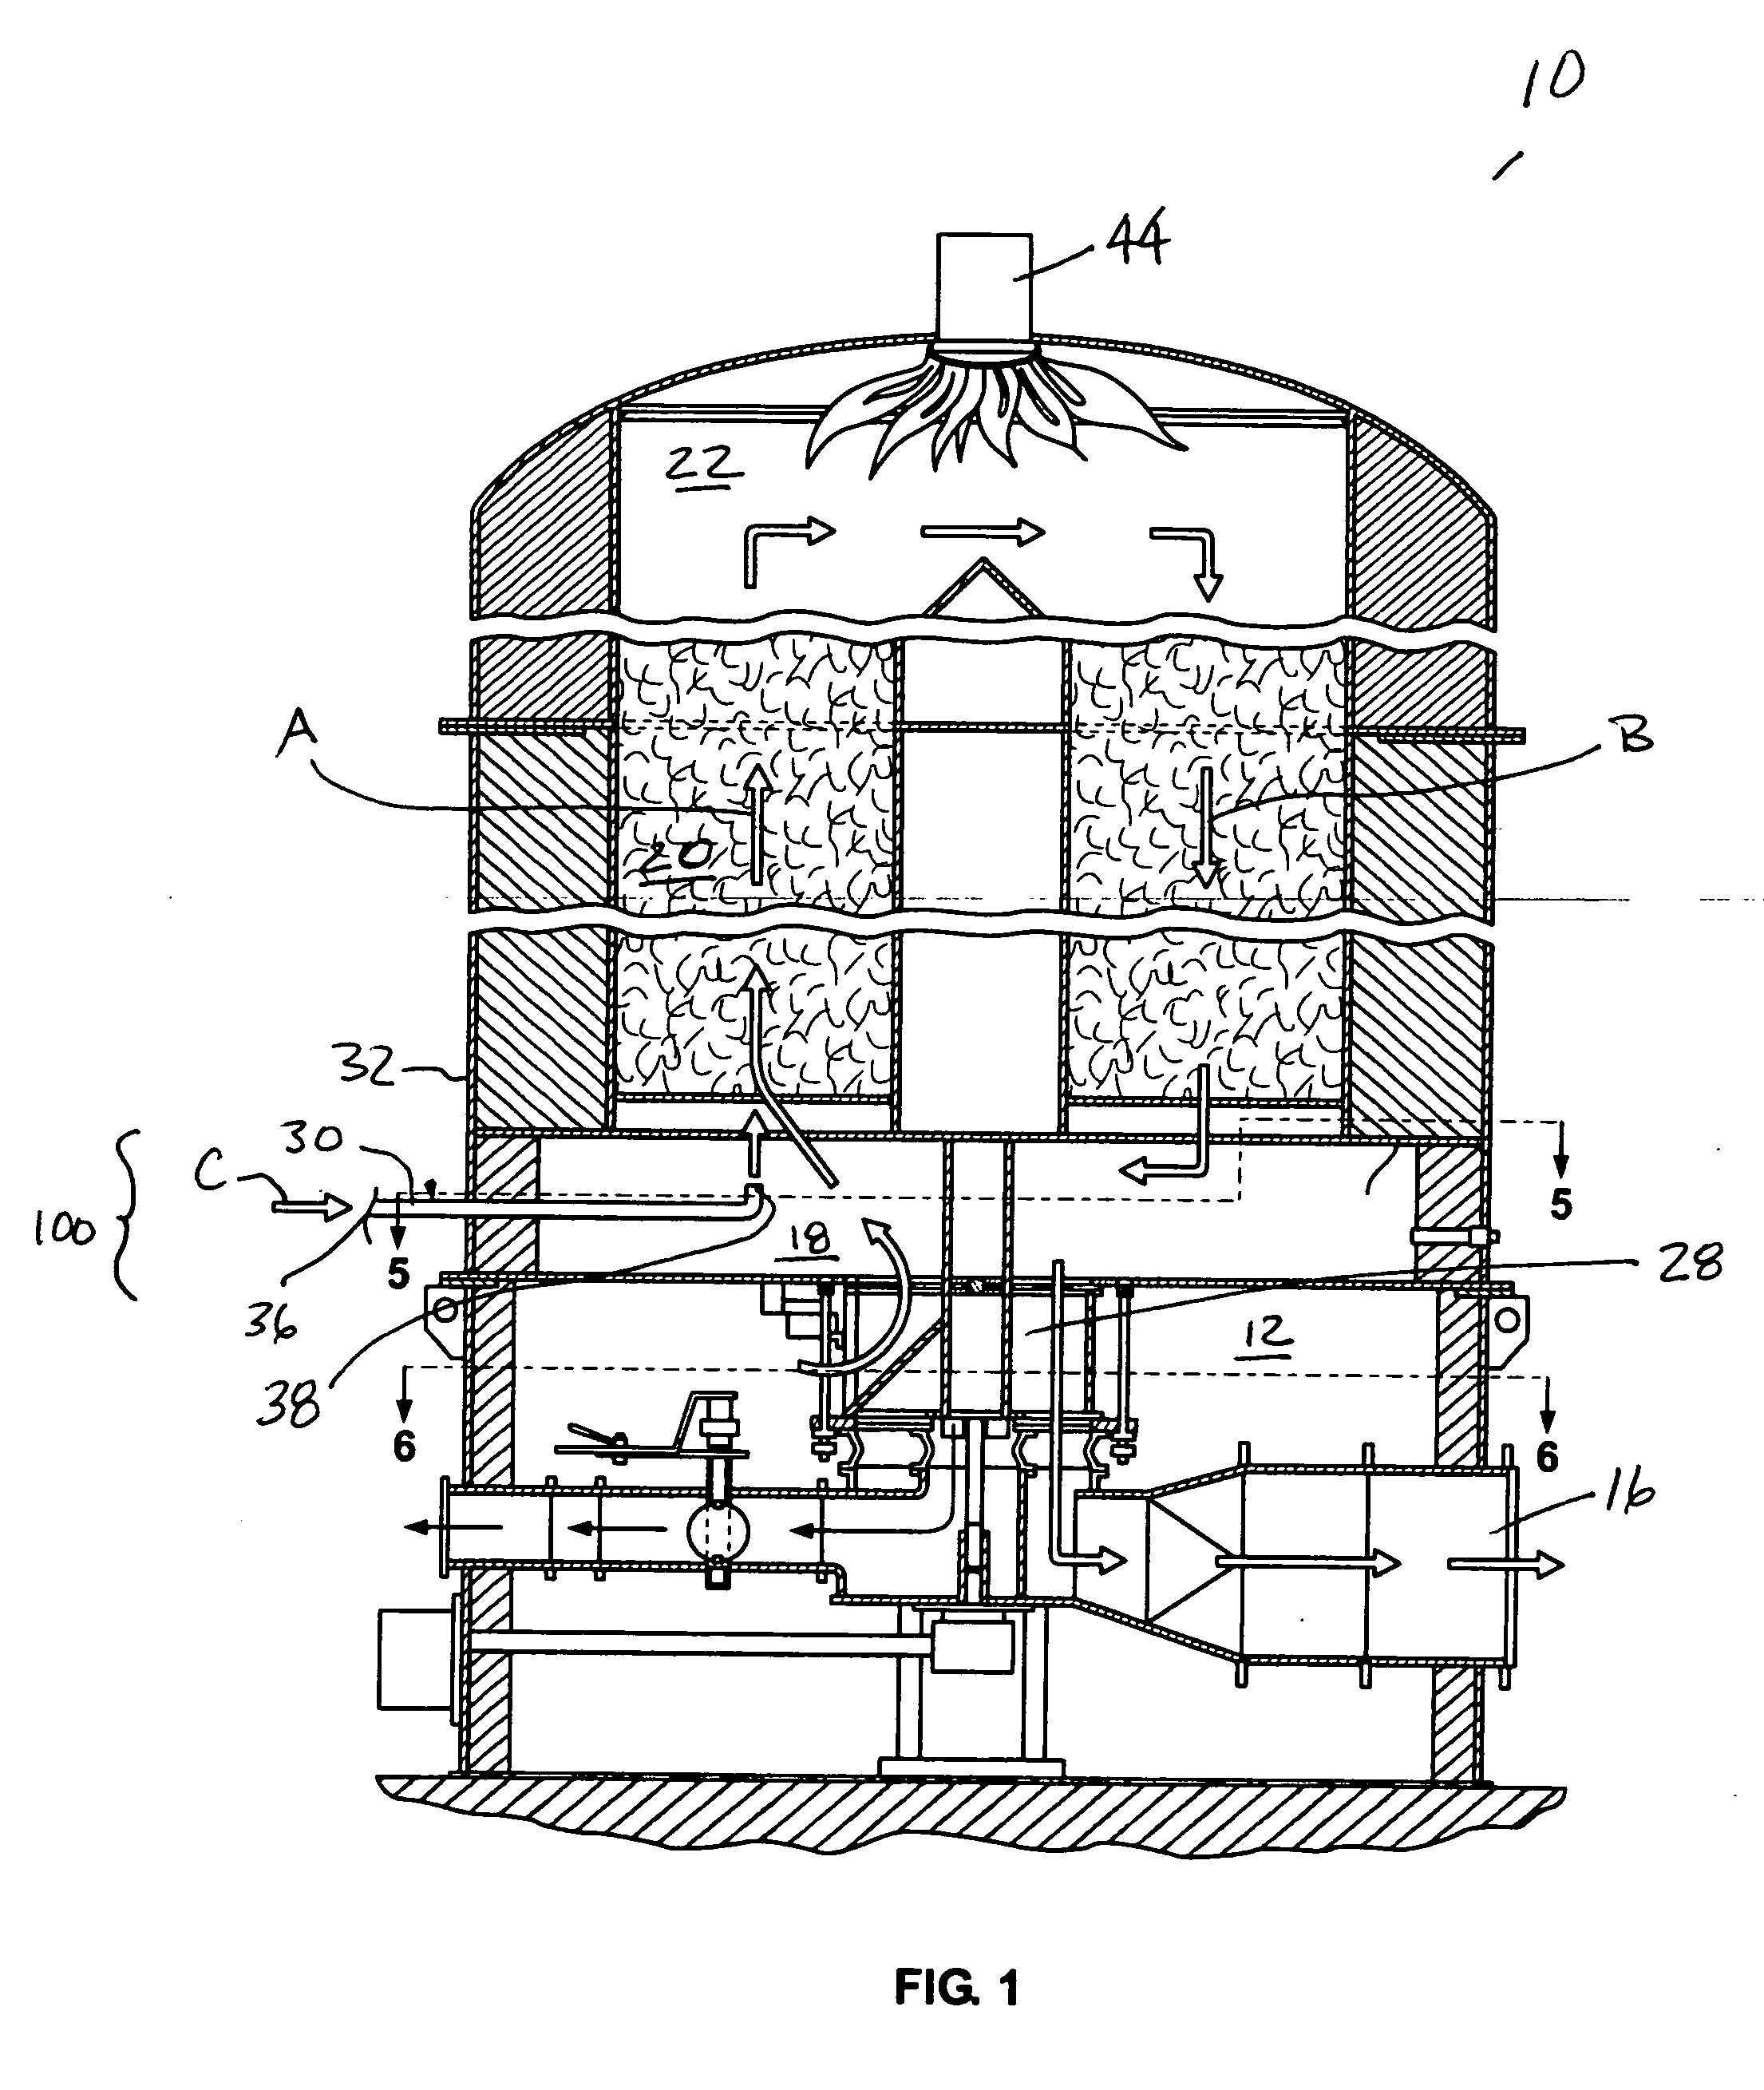 Natural gas injection system for regenerative thermal oxidizer